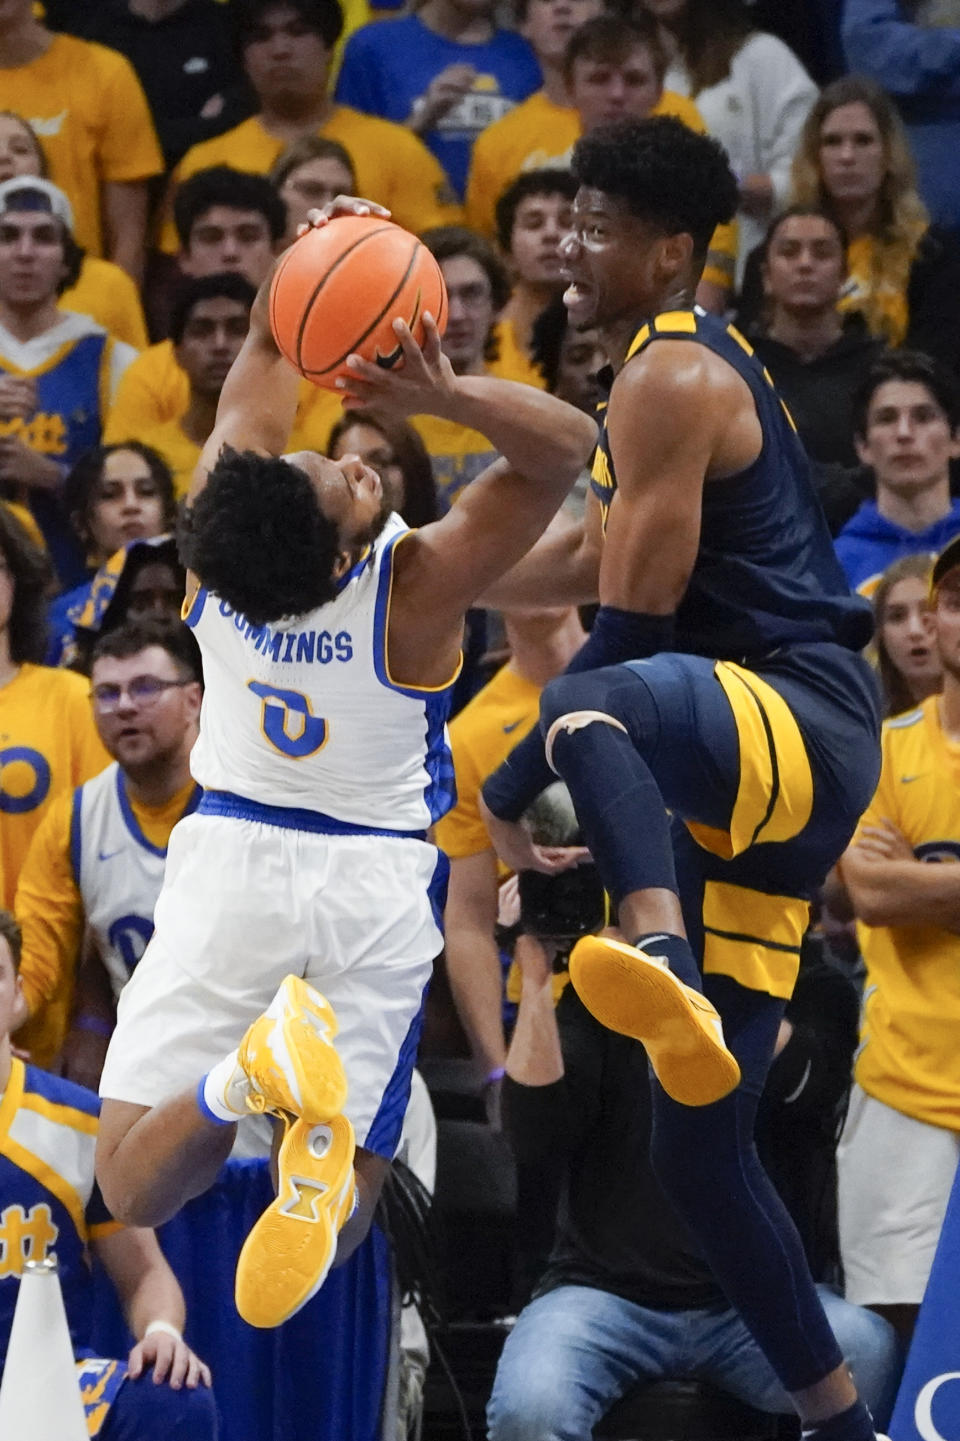 Pittsburgh's Nelly Cummings (0) shoots as West Virginia's Mohamed Wague, right, defends during the first half of an NCAA college basketball game, Friday, Nov. 11, 2022, in Pittsburgh. (AP Photo/Keith Srakocic)